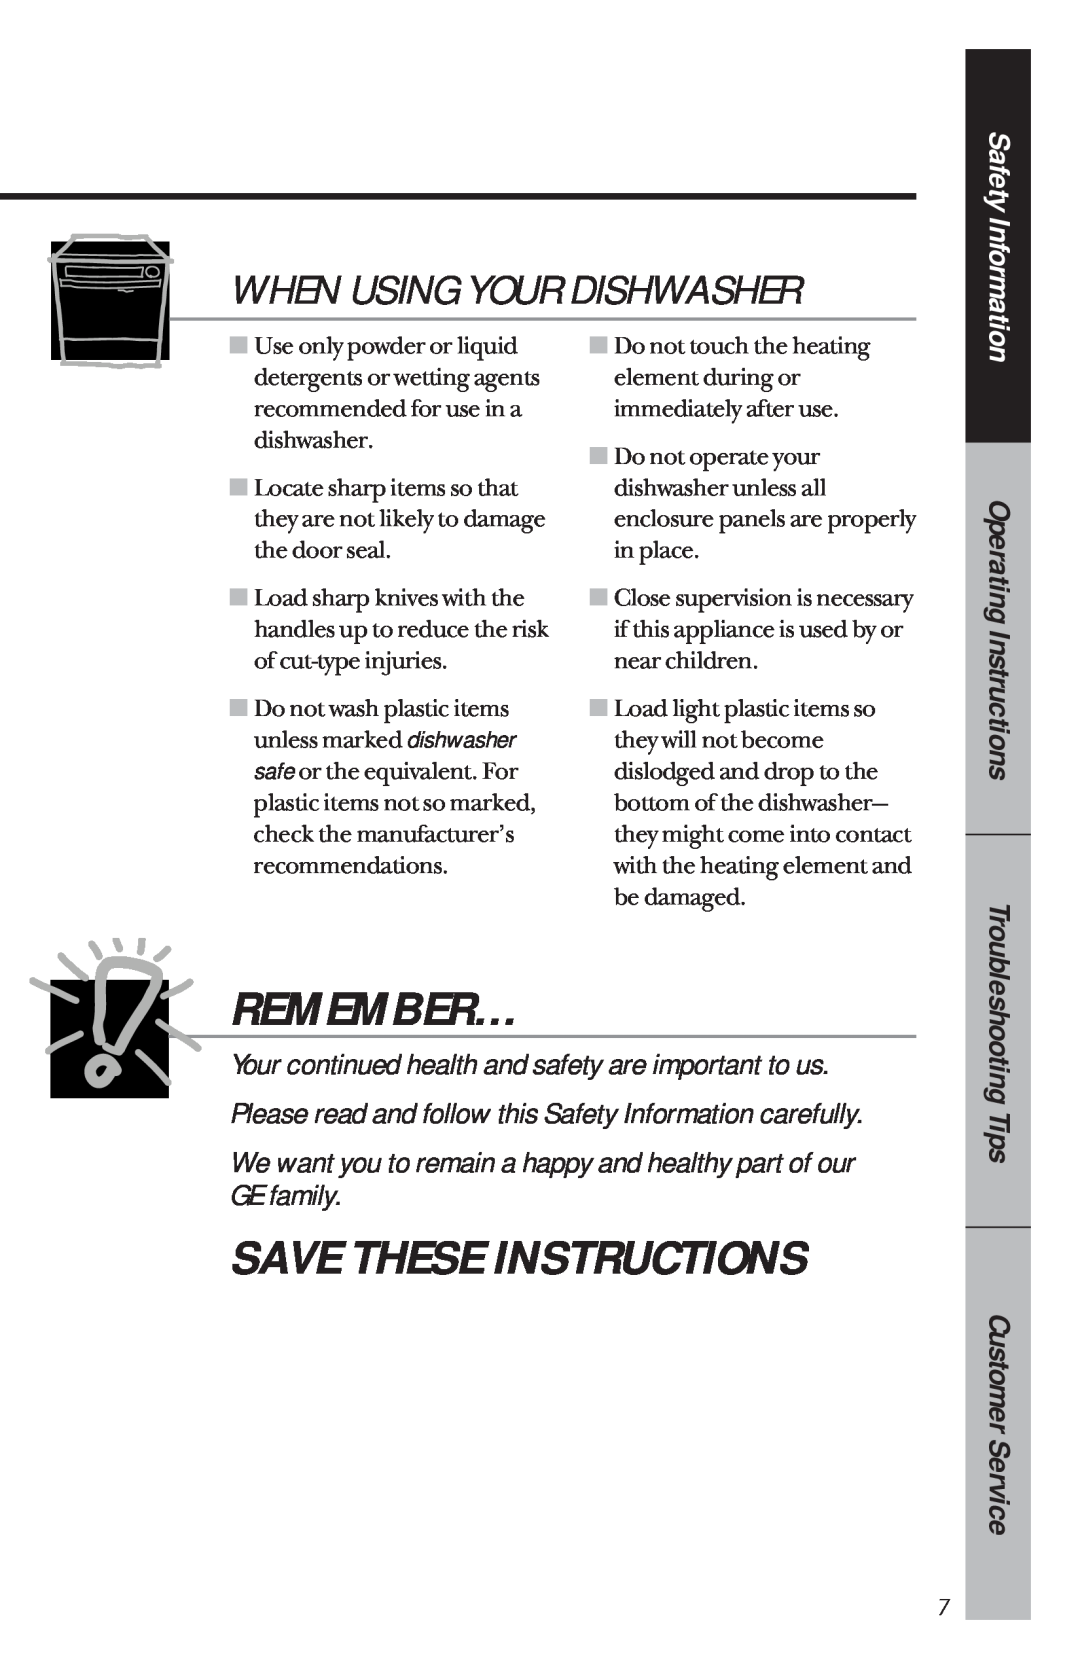 GE GSD4210 When Using Your Dishwasher, Operating Instructions, Customer Service, Remember…, Save These Instructions 